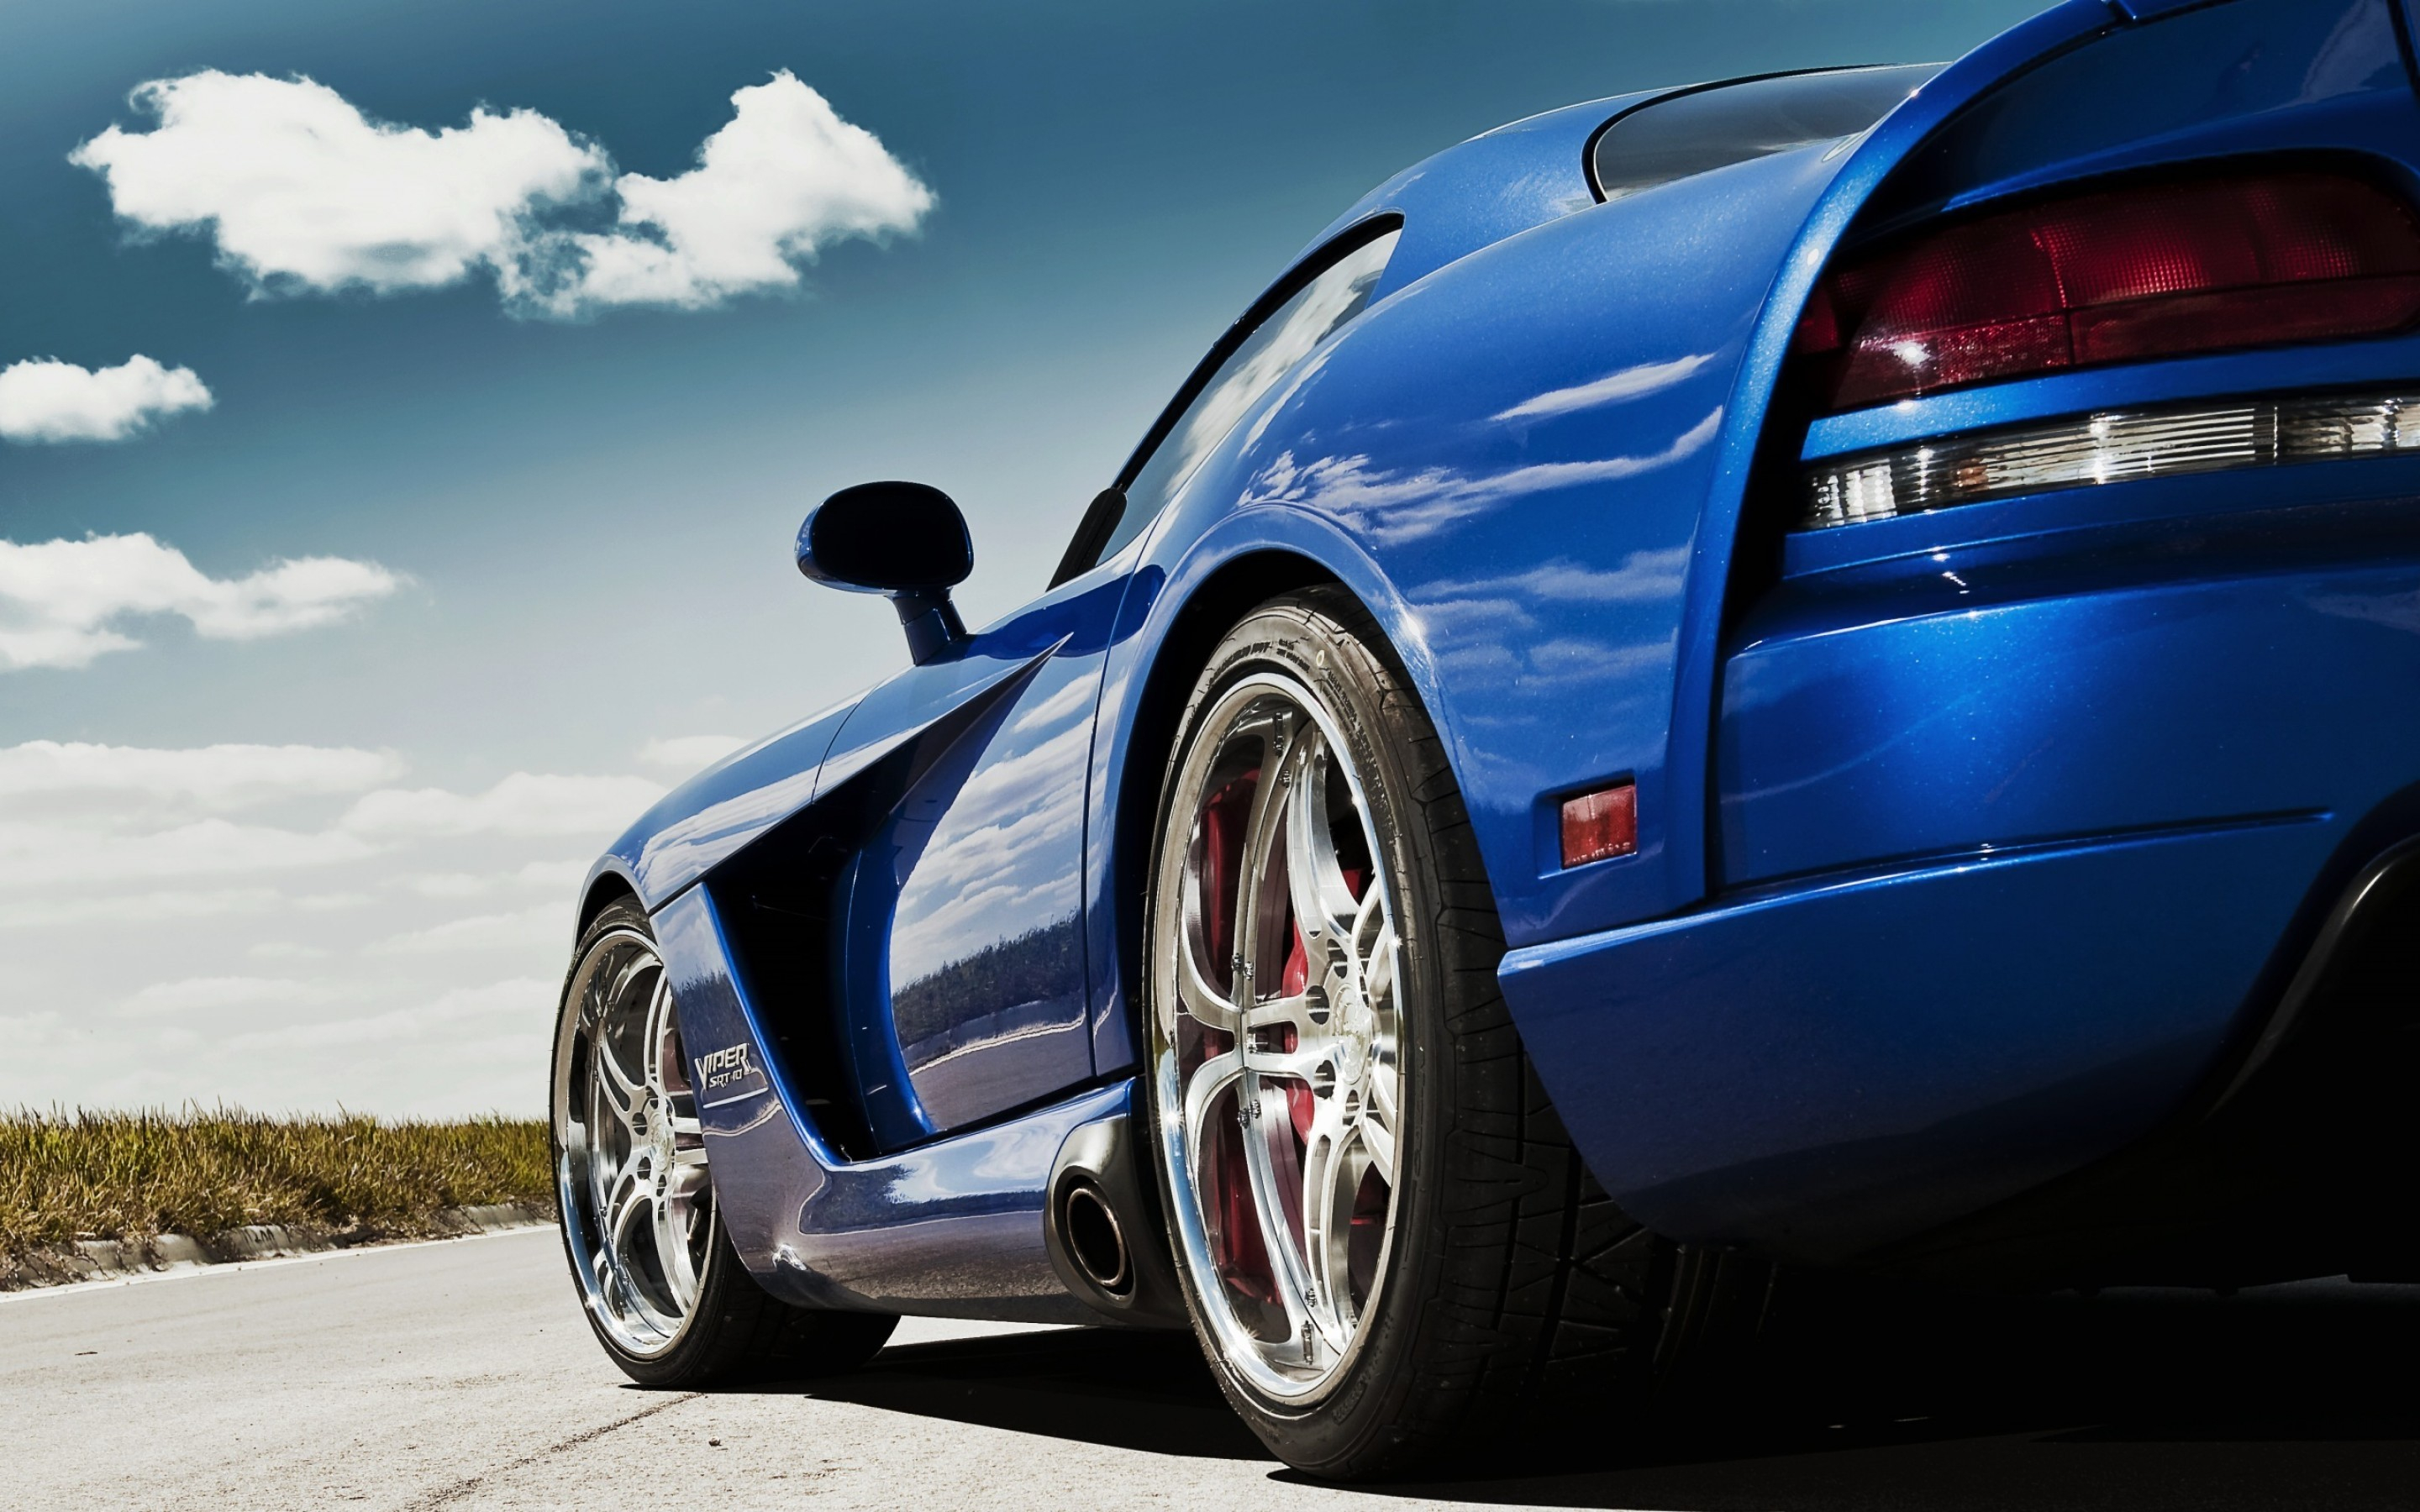 2880x1800 80+ Dodge SRT Viper GTS HD Wallpapers and Backgrounds